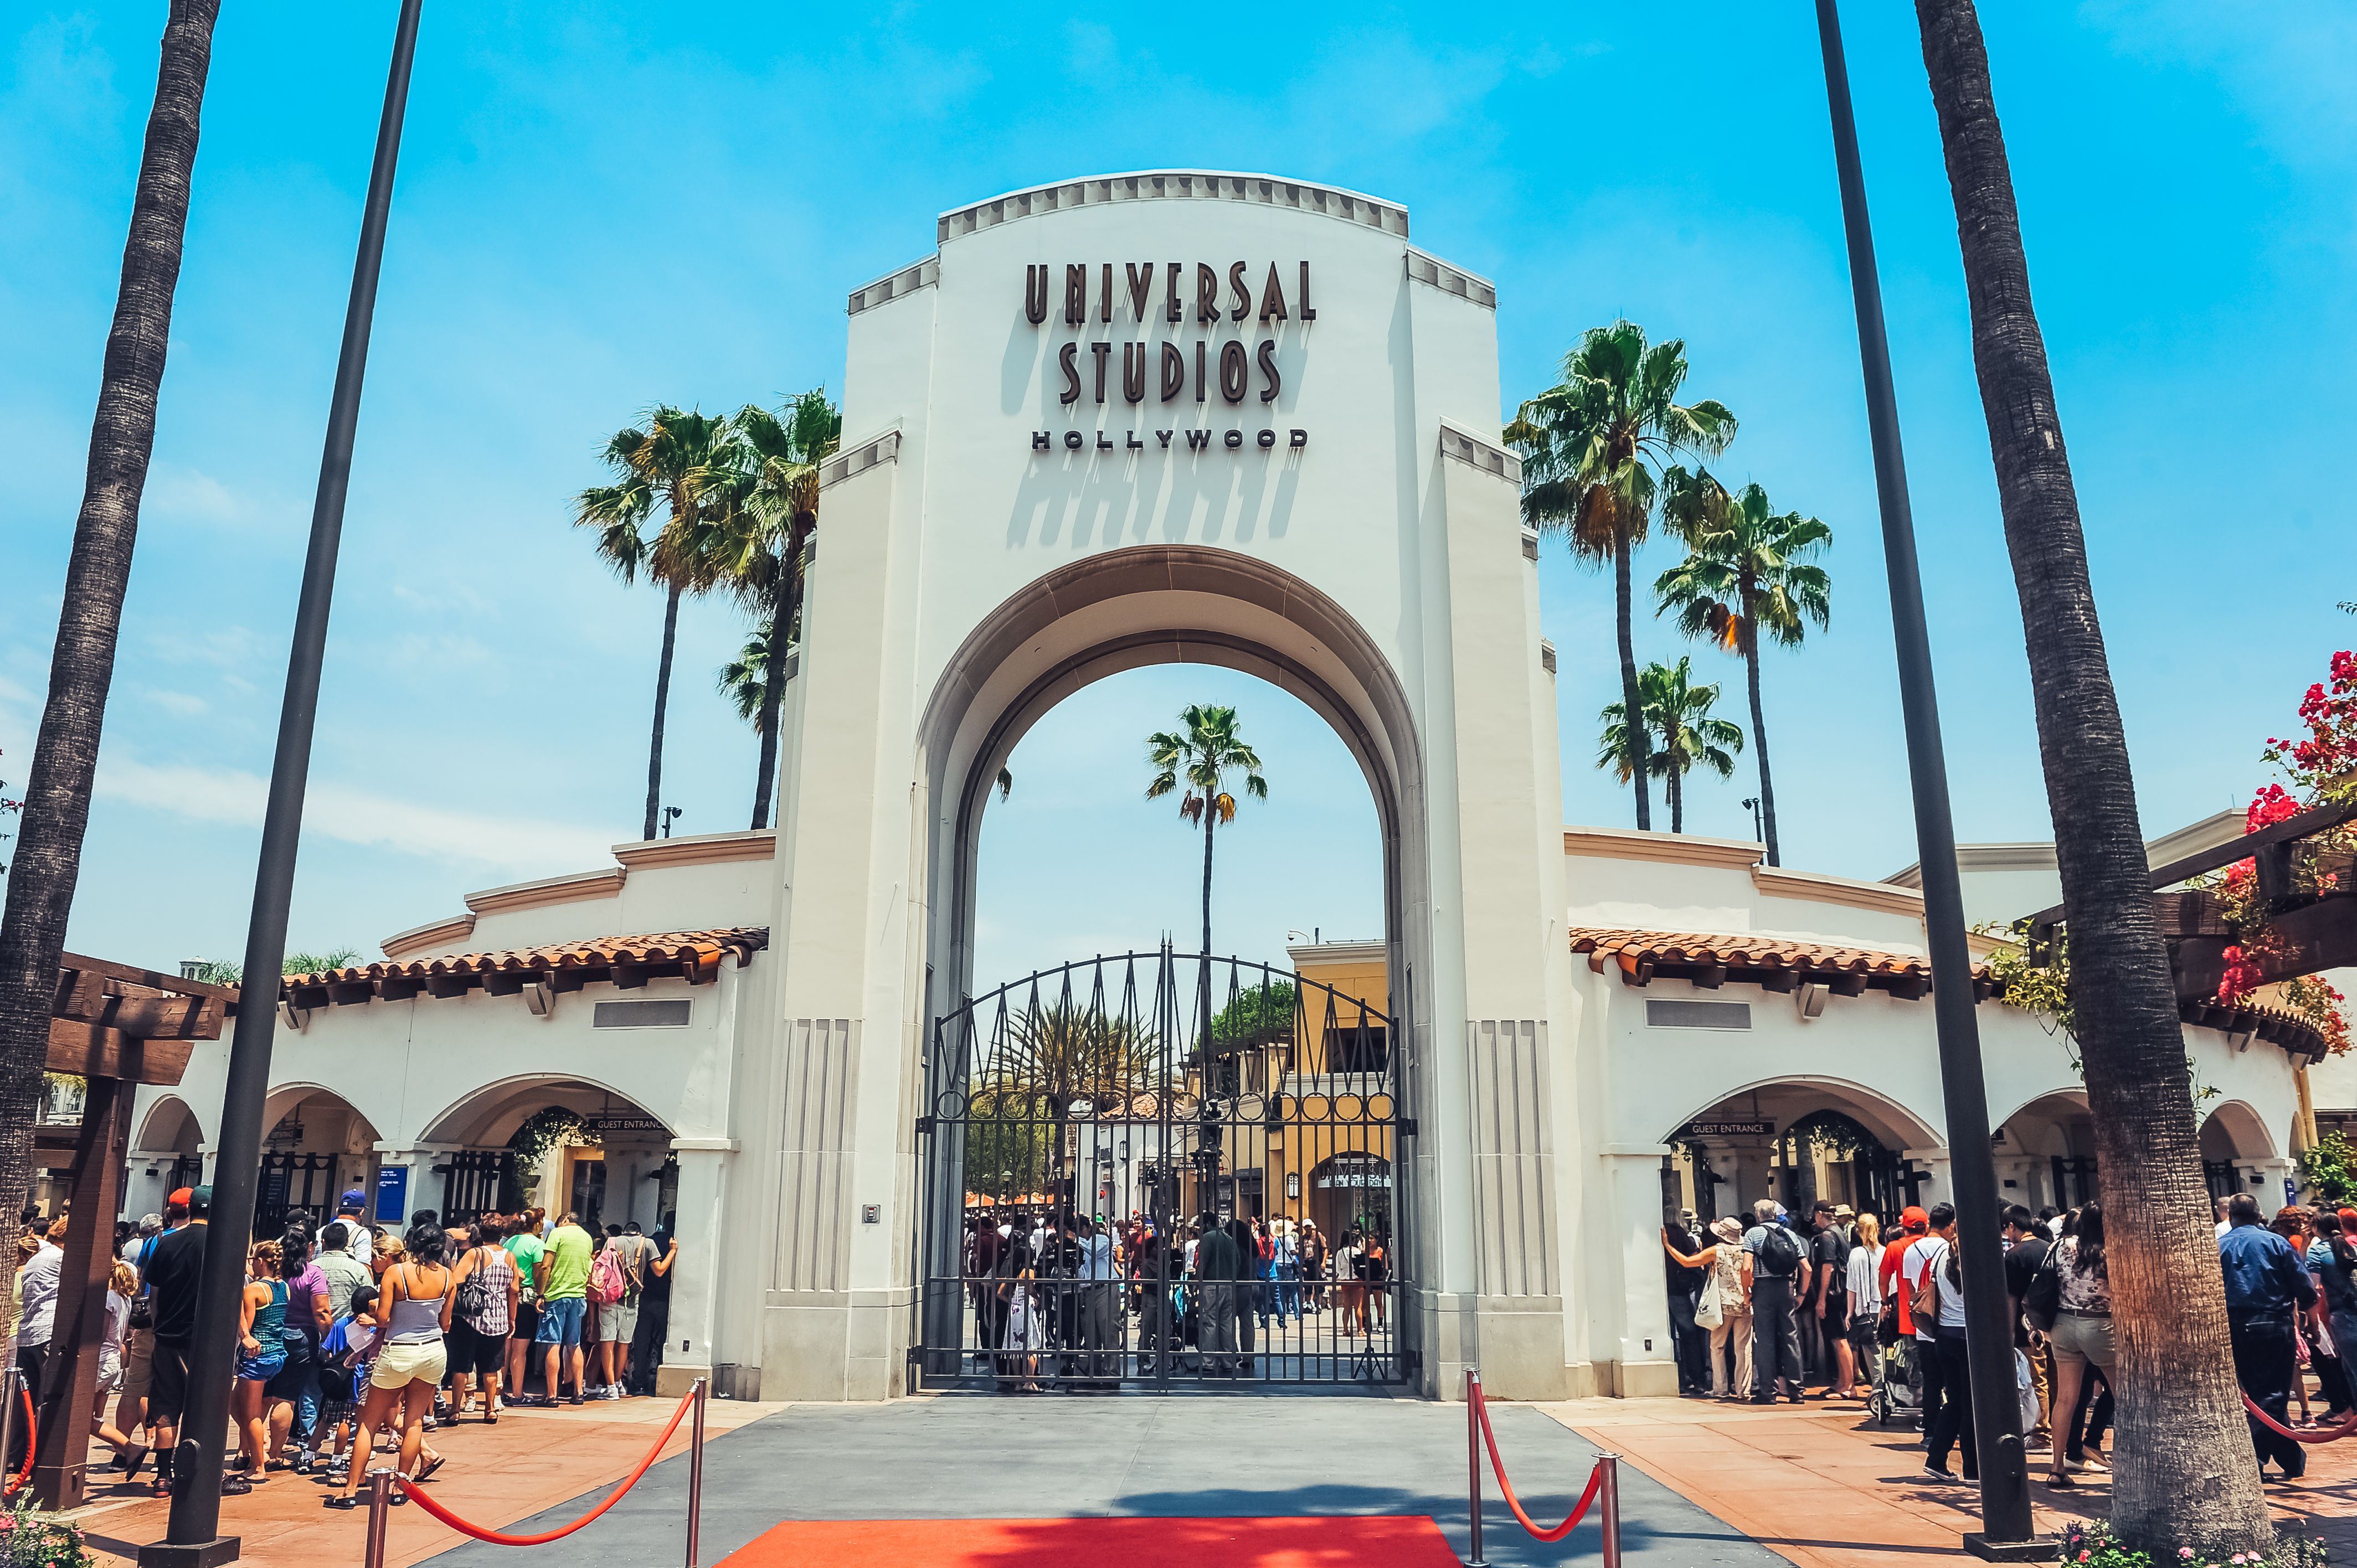 The archway and gated entrance at Universal Studios Hollywood, Los Angeles